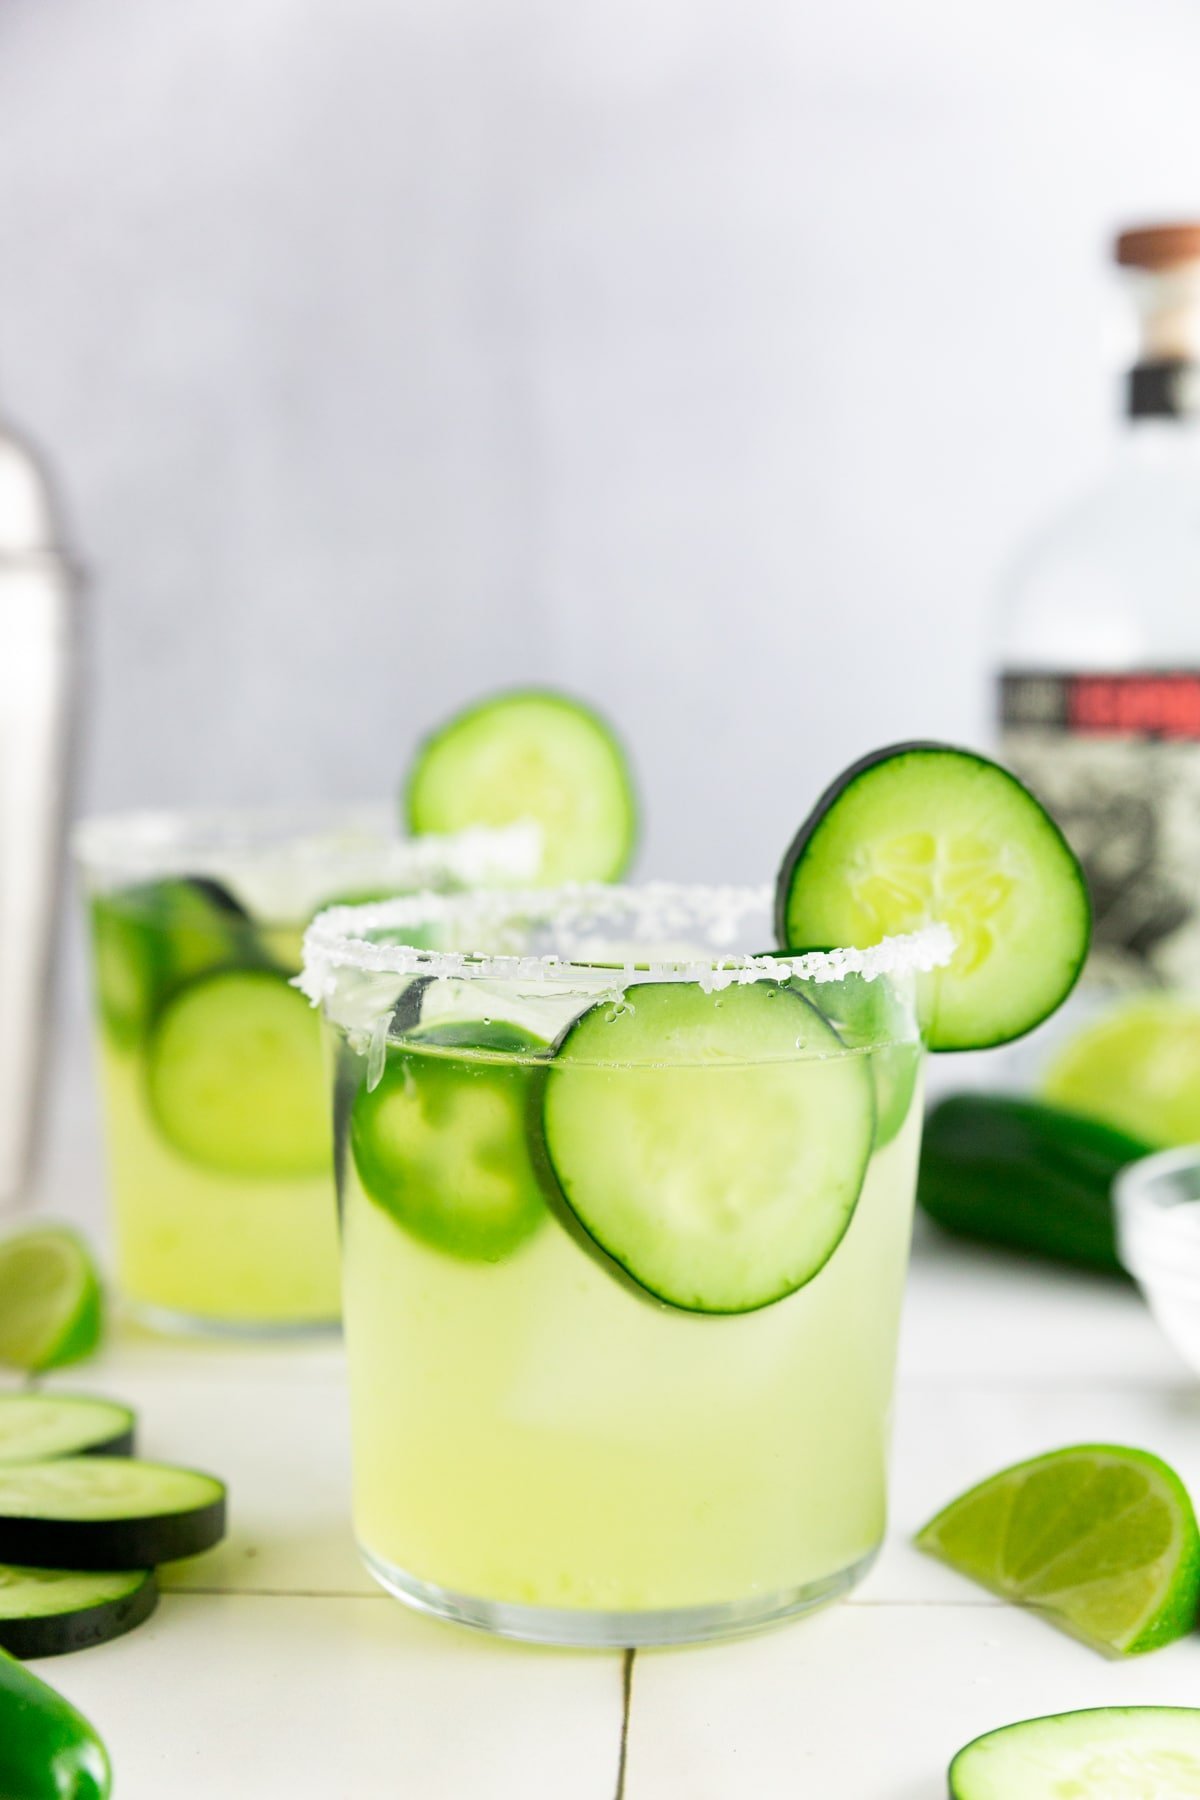 A photo of a cucumber jalapeño margarita with a salted rim and a bottle of tequila and a cocktail shaker in the background.